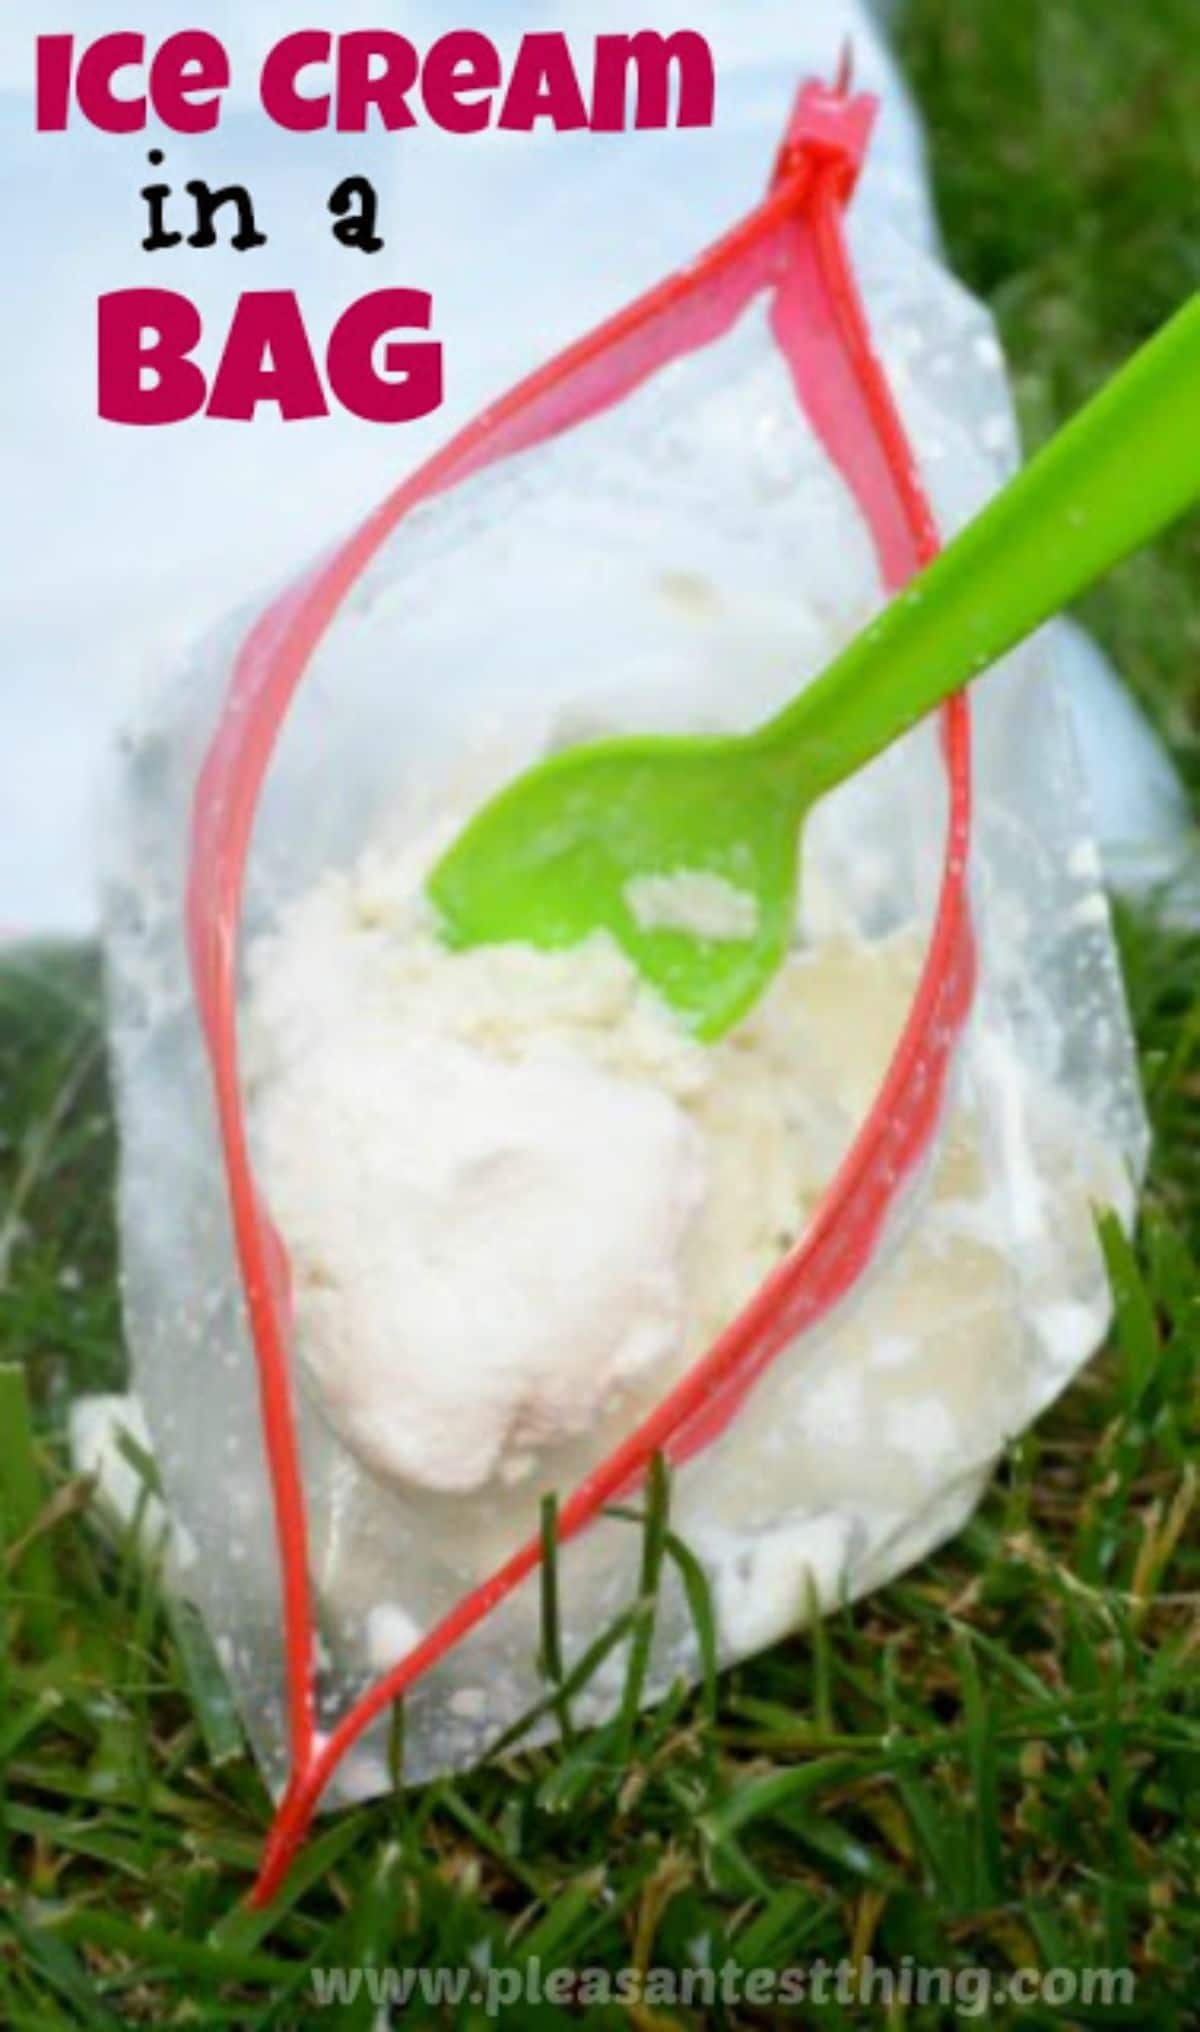 the text reads "Ice cream in a bag" the photo is of an open ziplock bag filled with ice cream a green spoon is sticking out of it